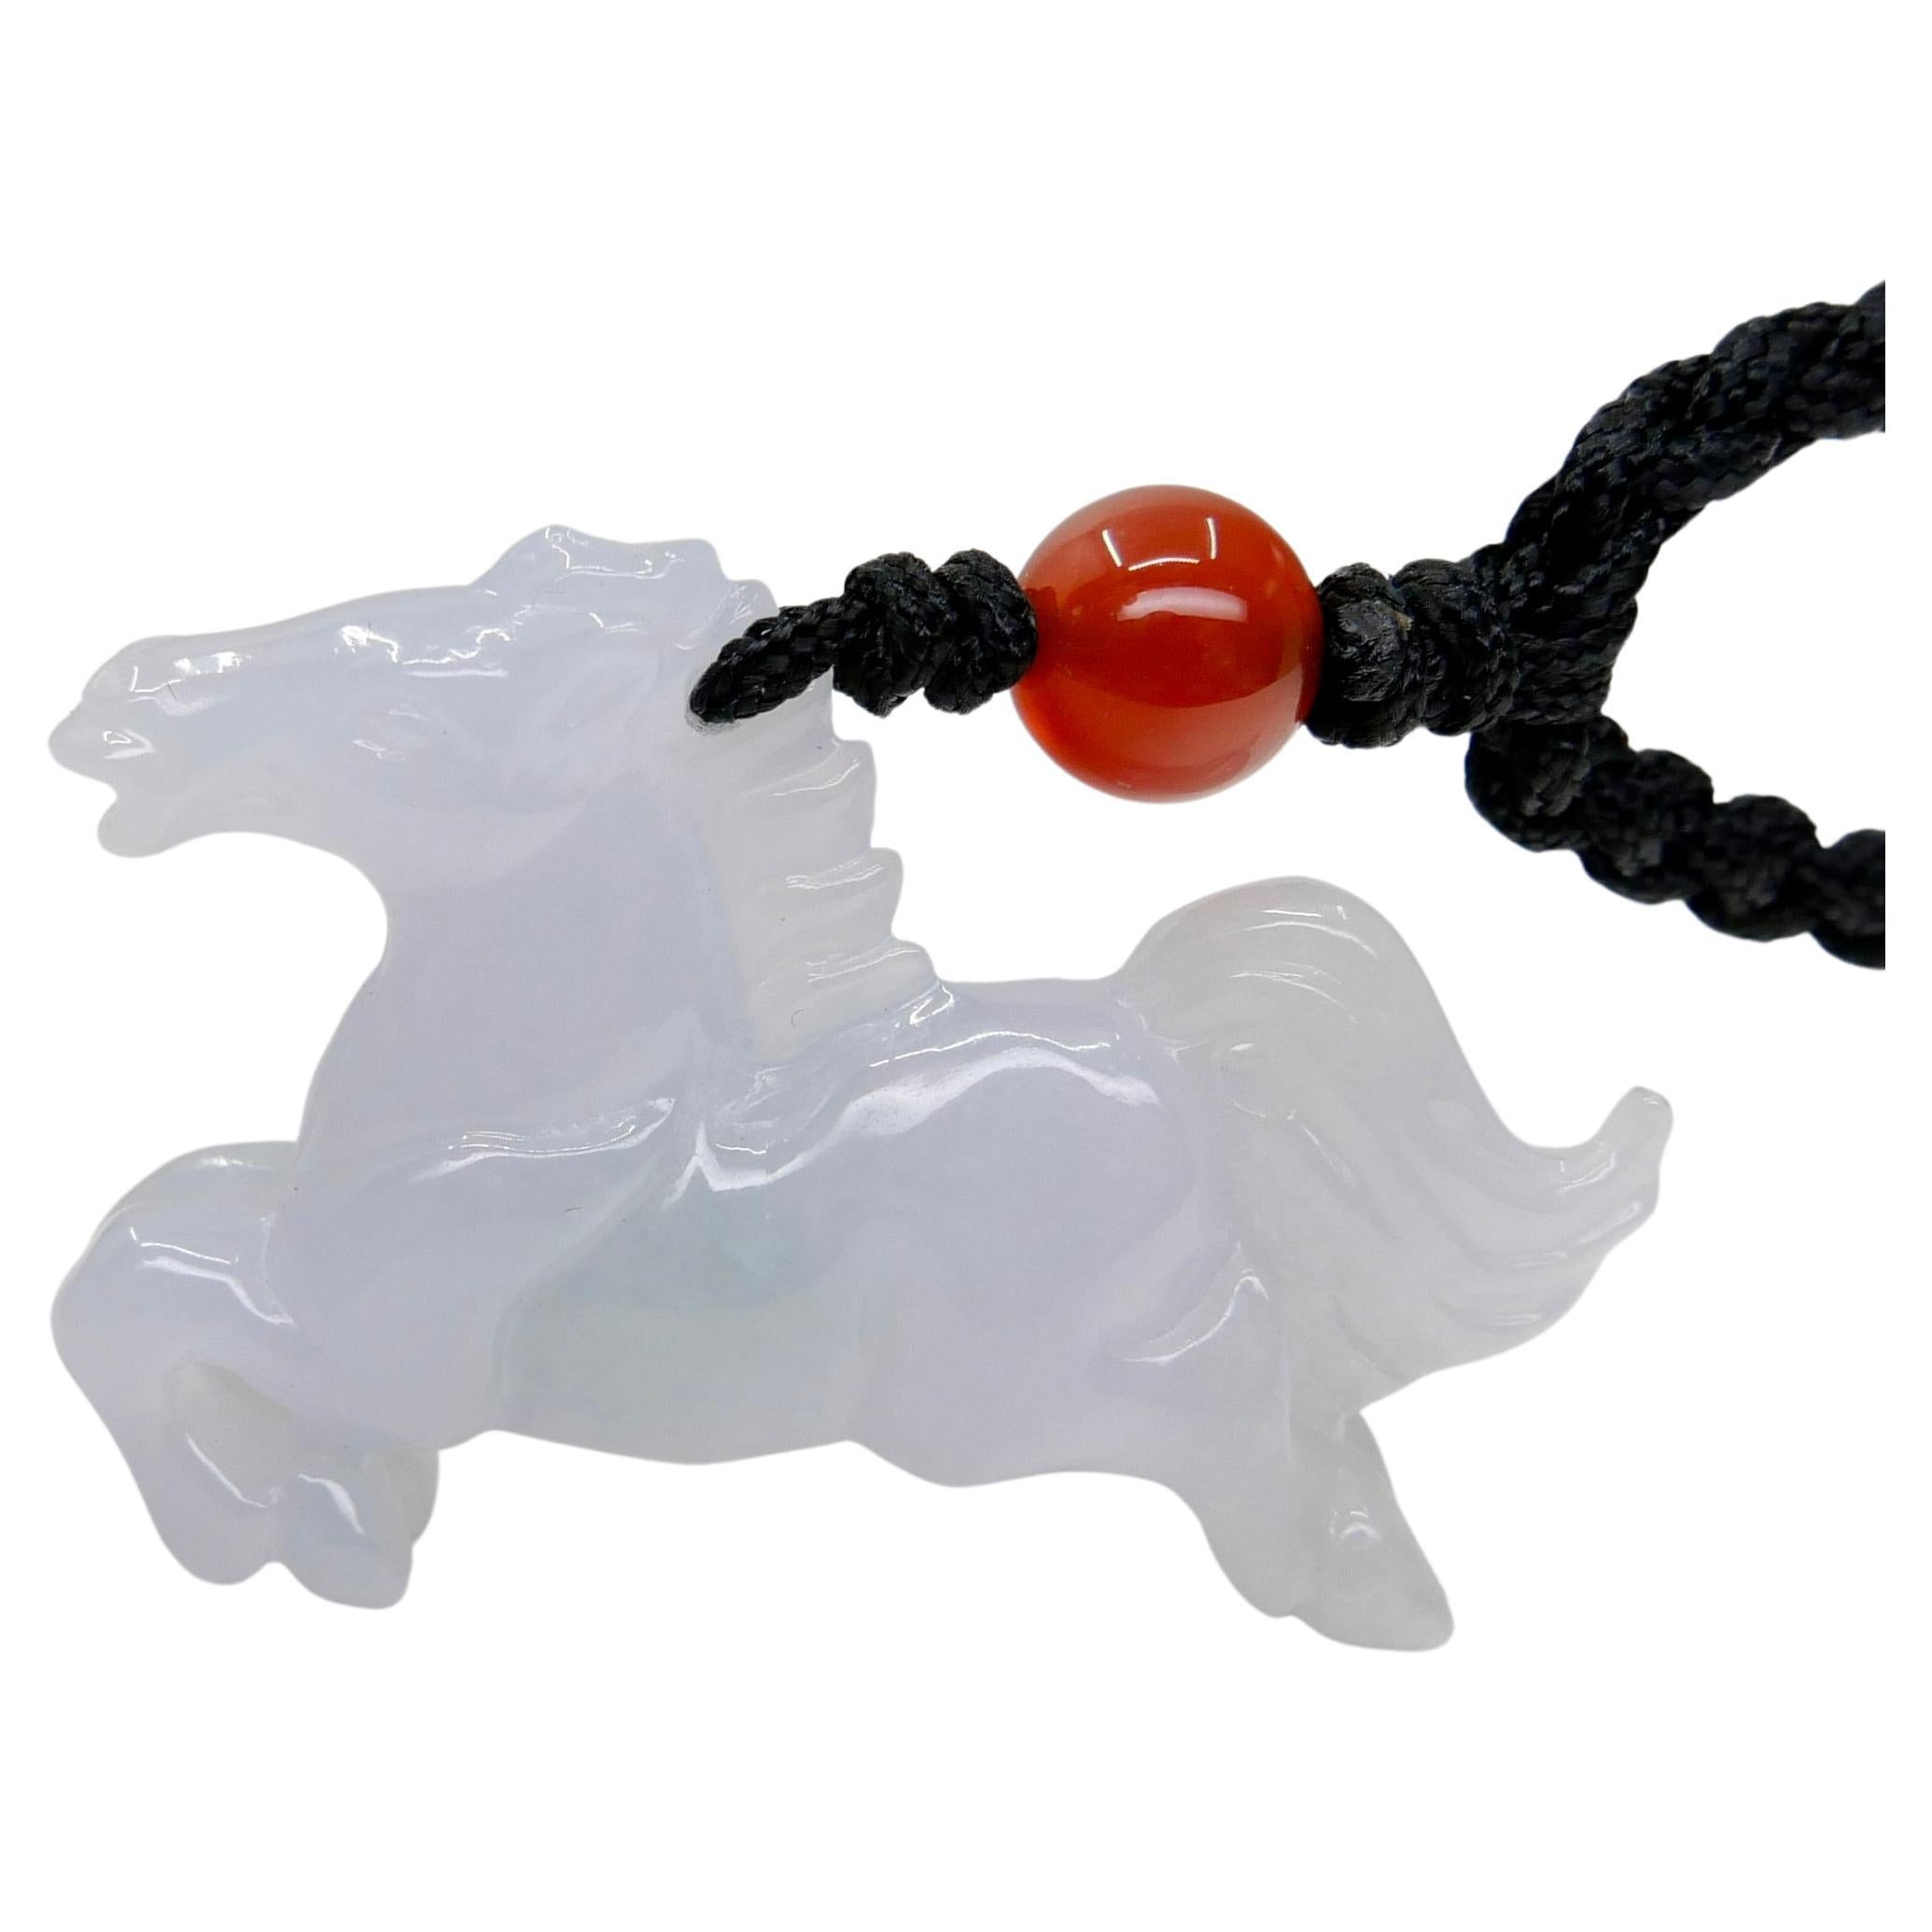 Certified 29 Carat Jade Horse Pendant, Perfect for Equestrians & Horse Lovers